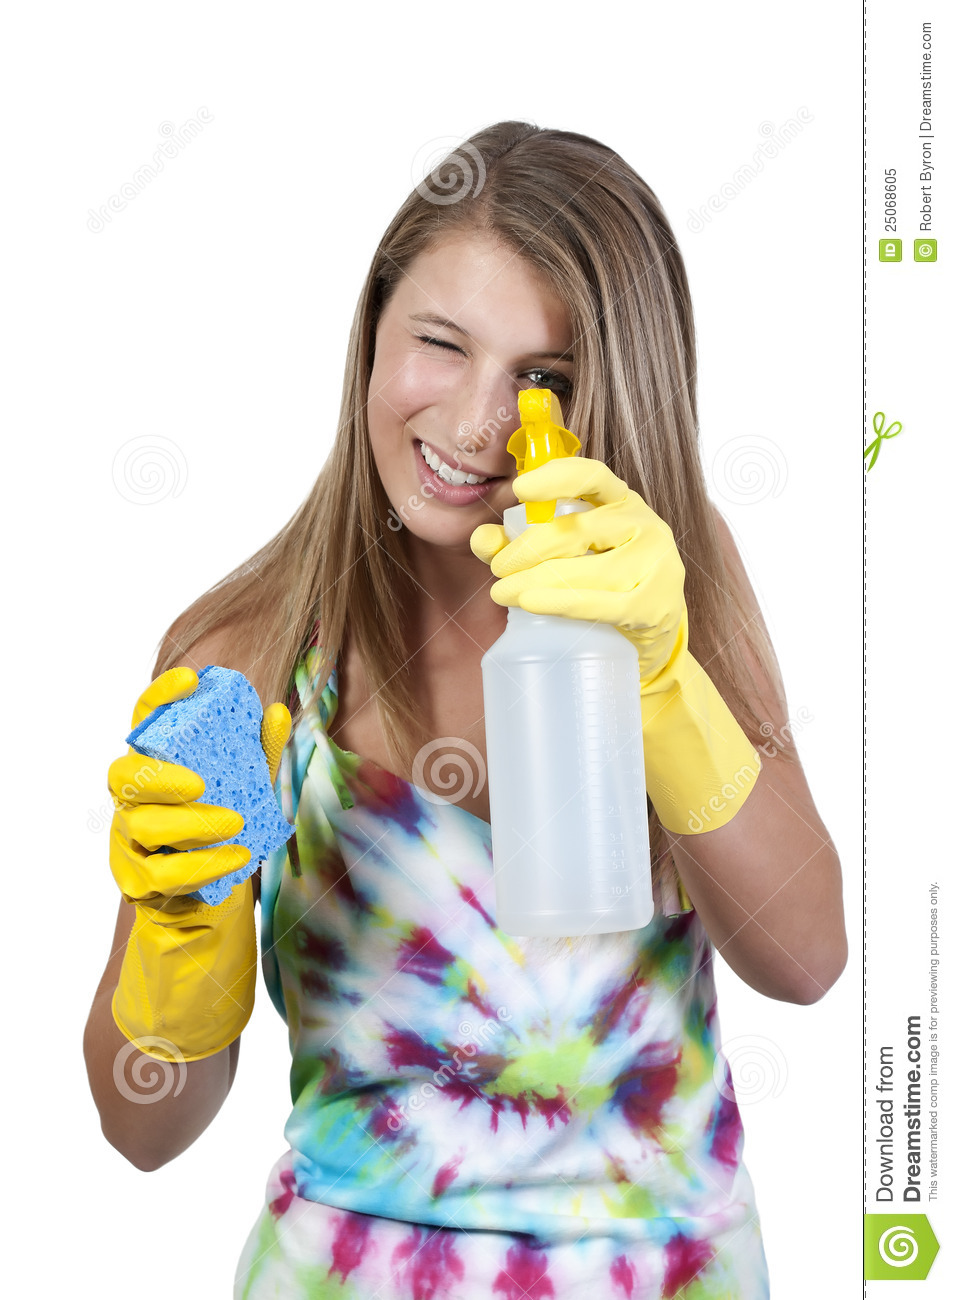 Aglove Wearing Beautiful Woman Or Maid Cleaning House With A Sponge